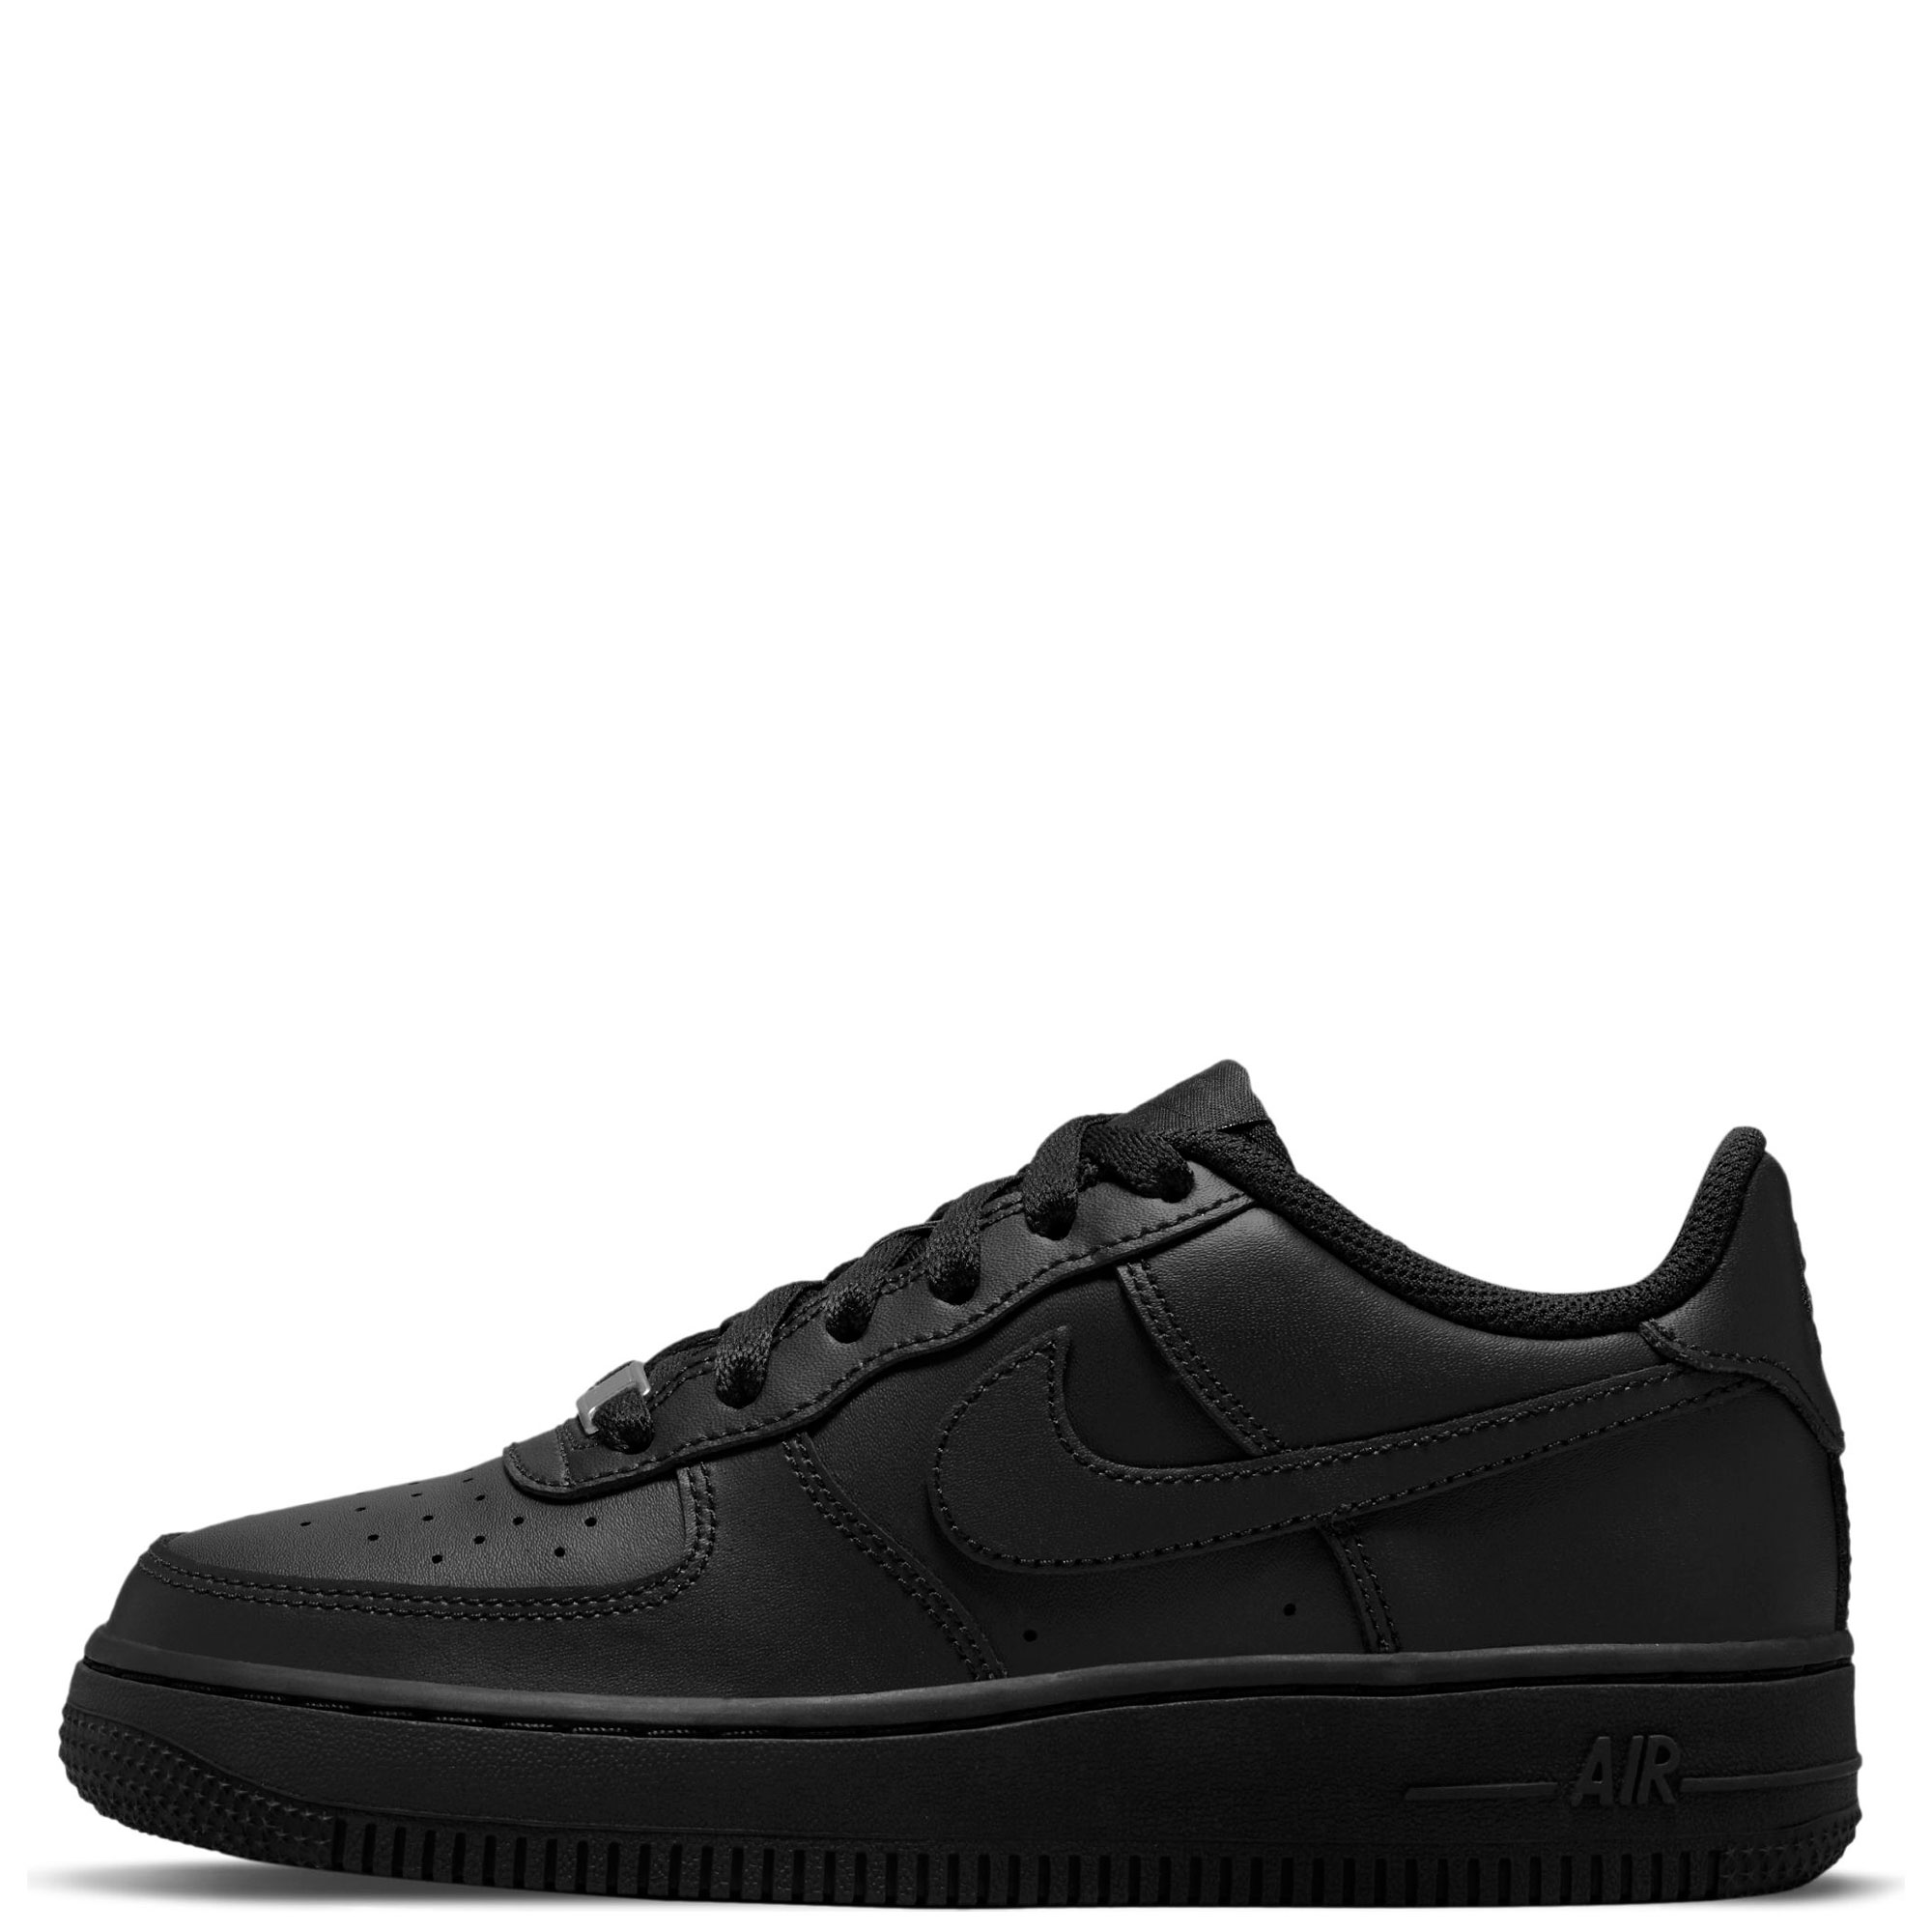 when were black air forces made